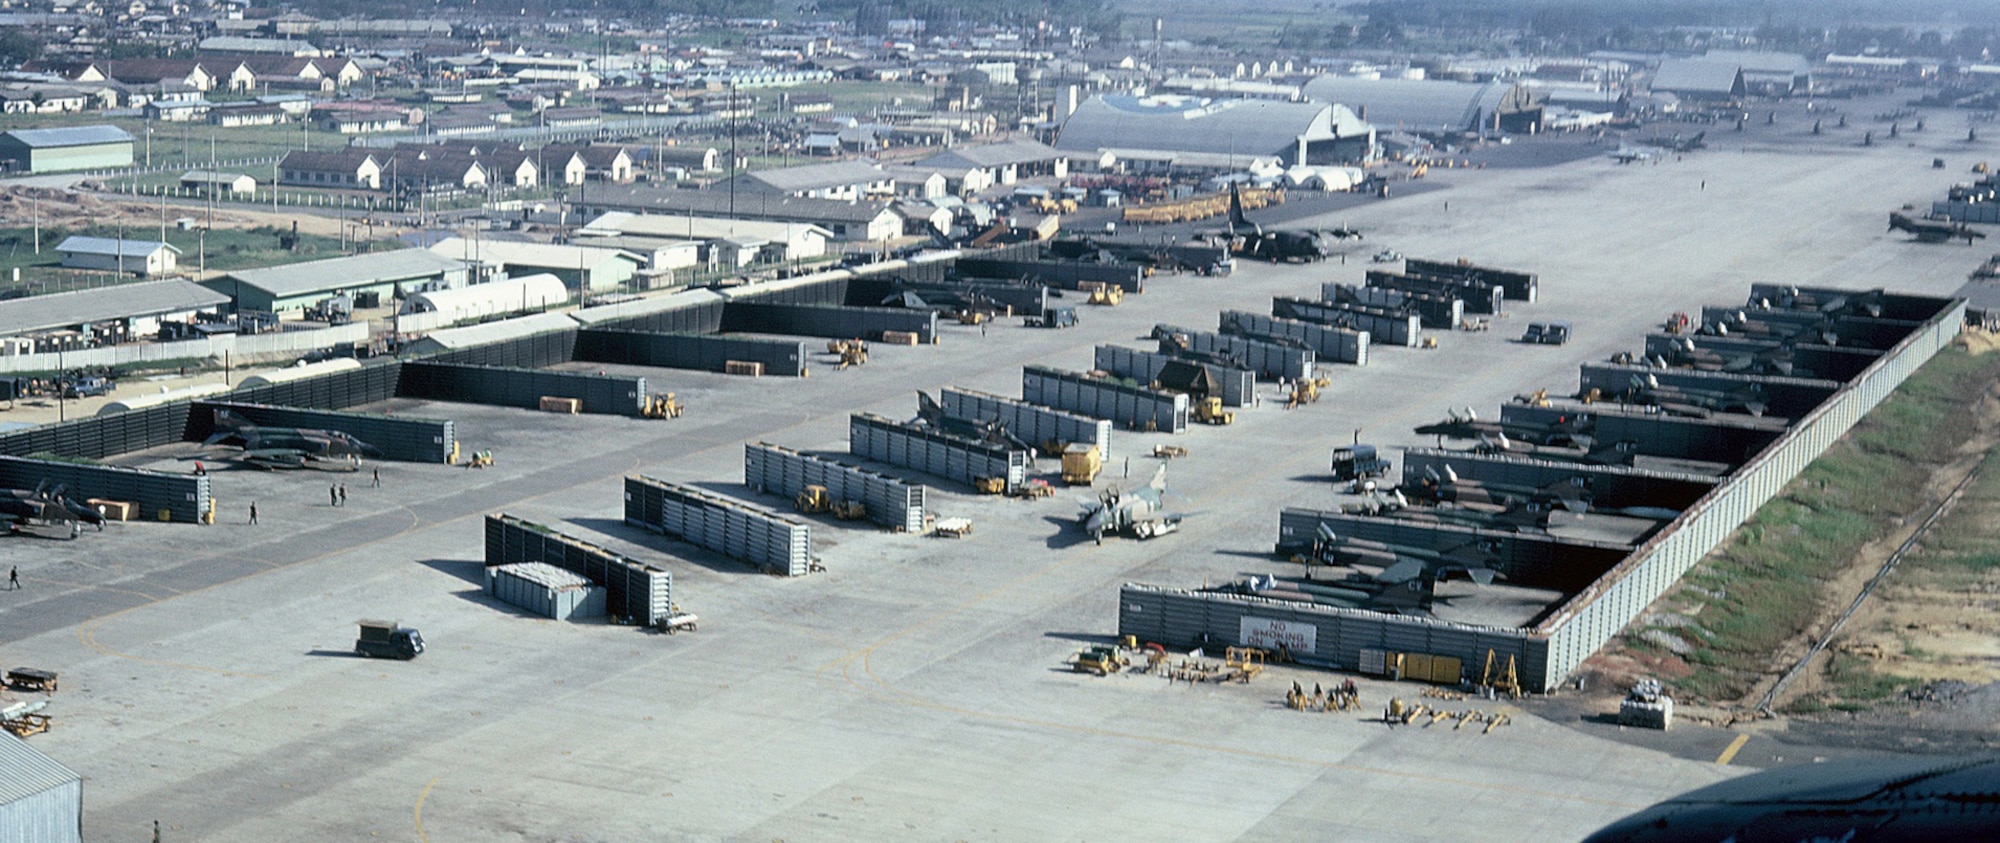 Revetments, like these at Da Nang Air Base, provided some protection against mortar and rocket attacks. (U.S. Air Force photo).